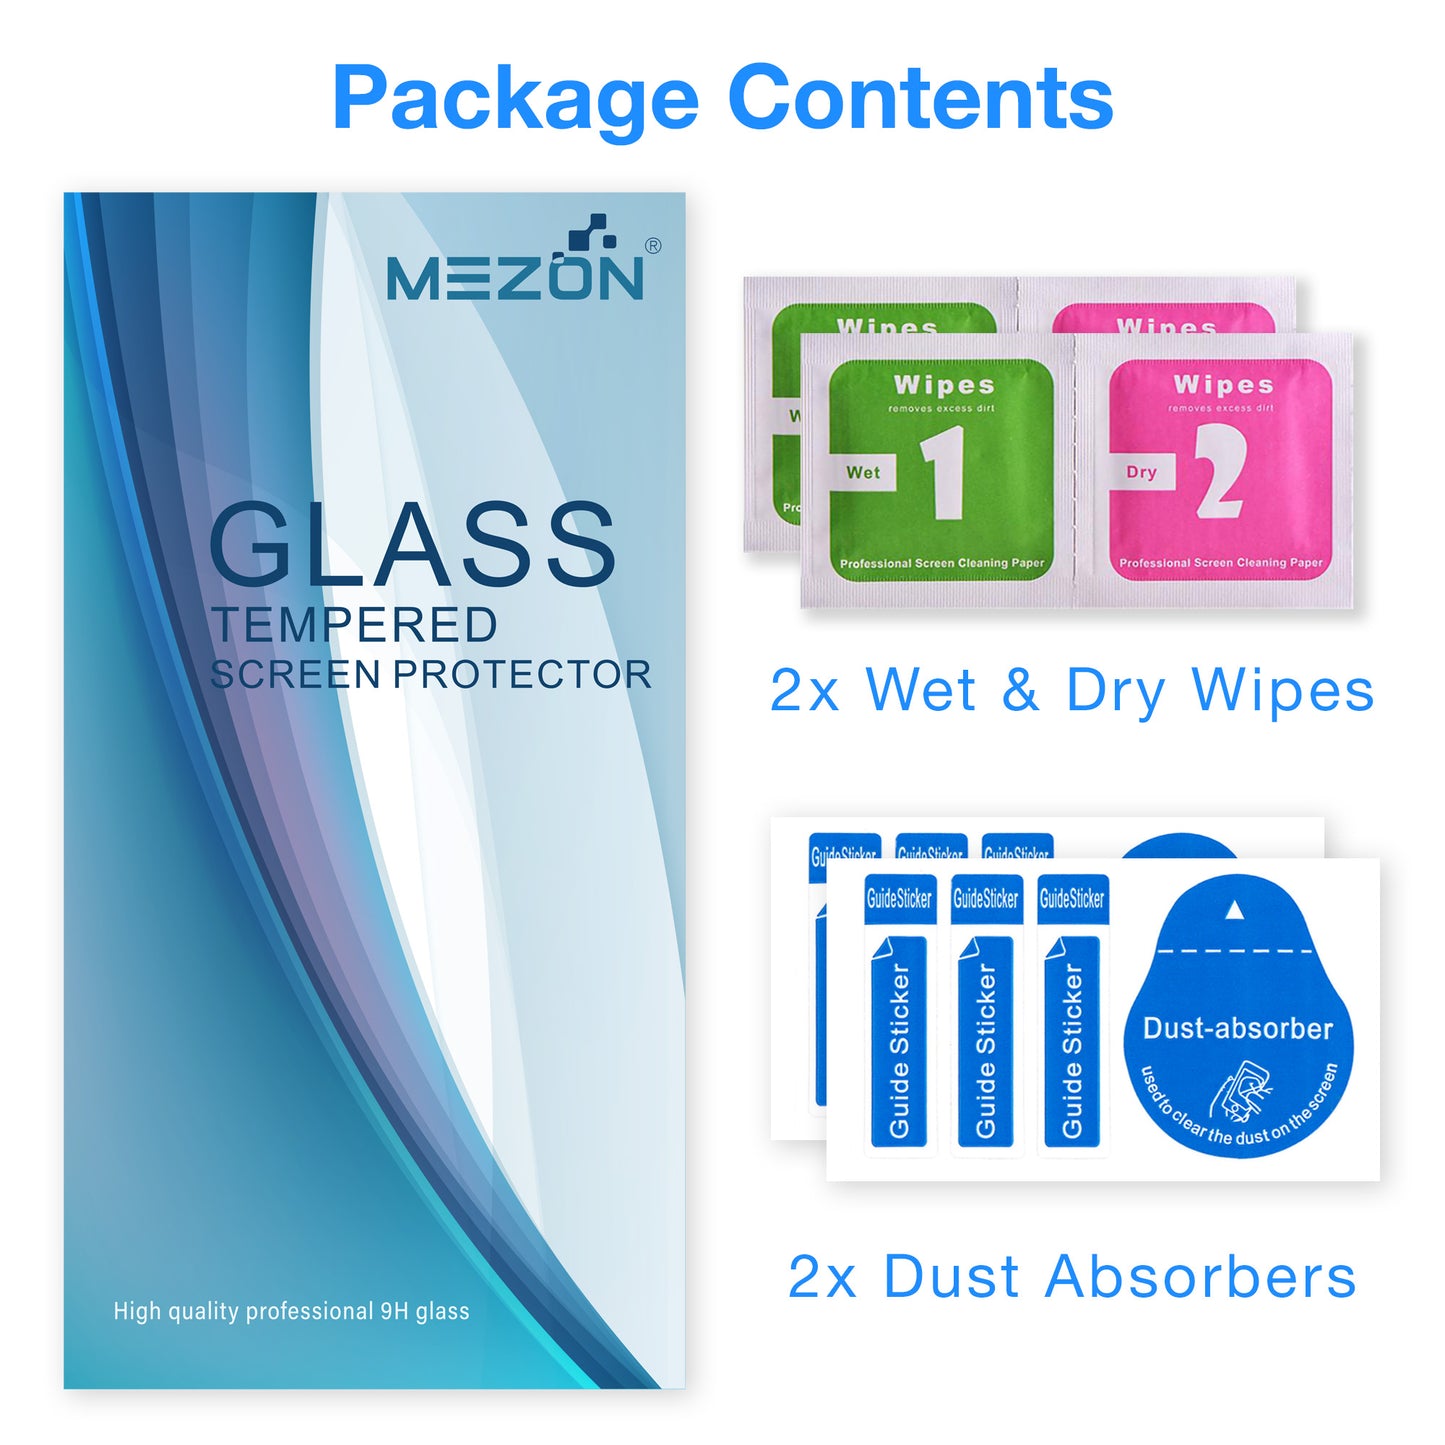 [2 Pack] MEZON Full Coverage OPPO A91 Tempered Glass Crystal Clear Premium 9H HD Screen Protector (OPPO A91, 9H Full)